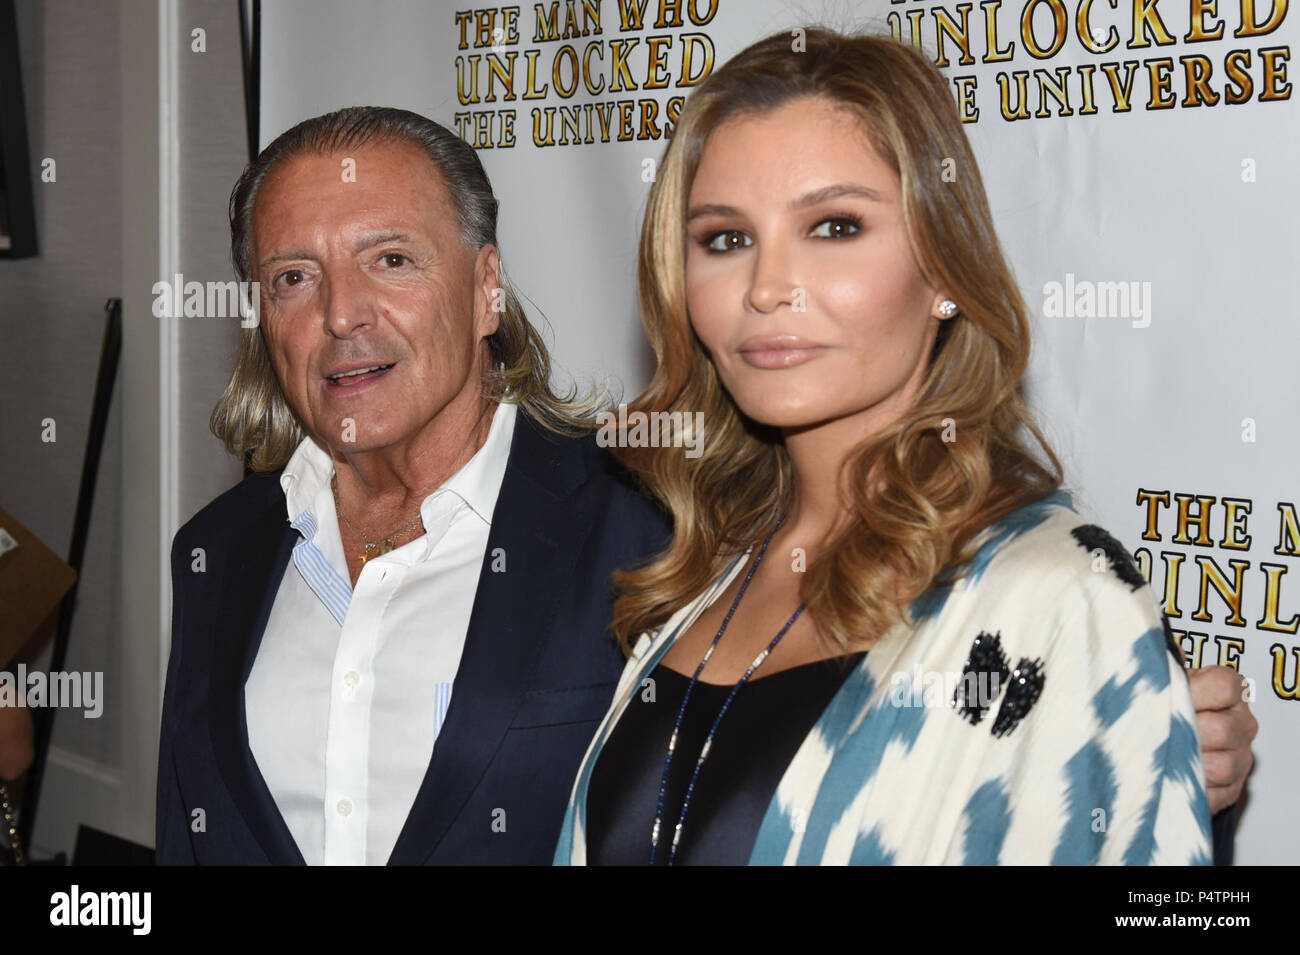 Armand Assante and Lola Tillyaeva attends the Premiere of 'The Man Who Unlocked The Universe' at The London West Hollywood on June 21, 2018 in West Hollywood, California. Stock Photo